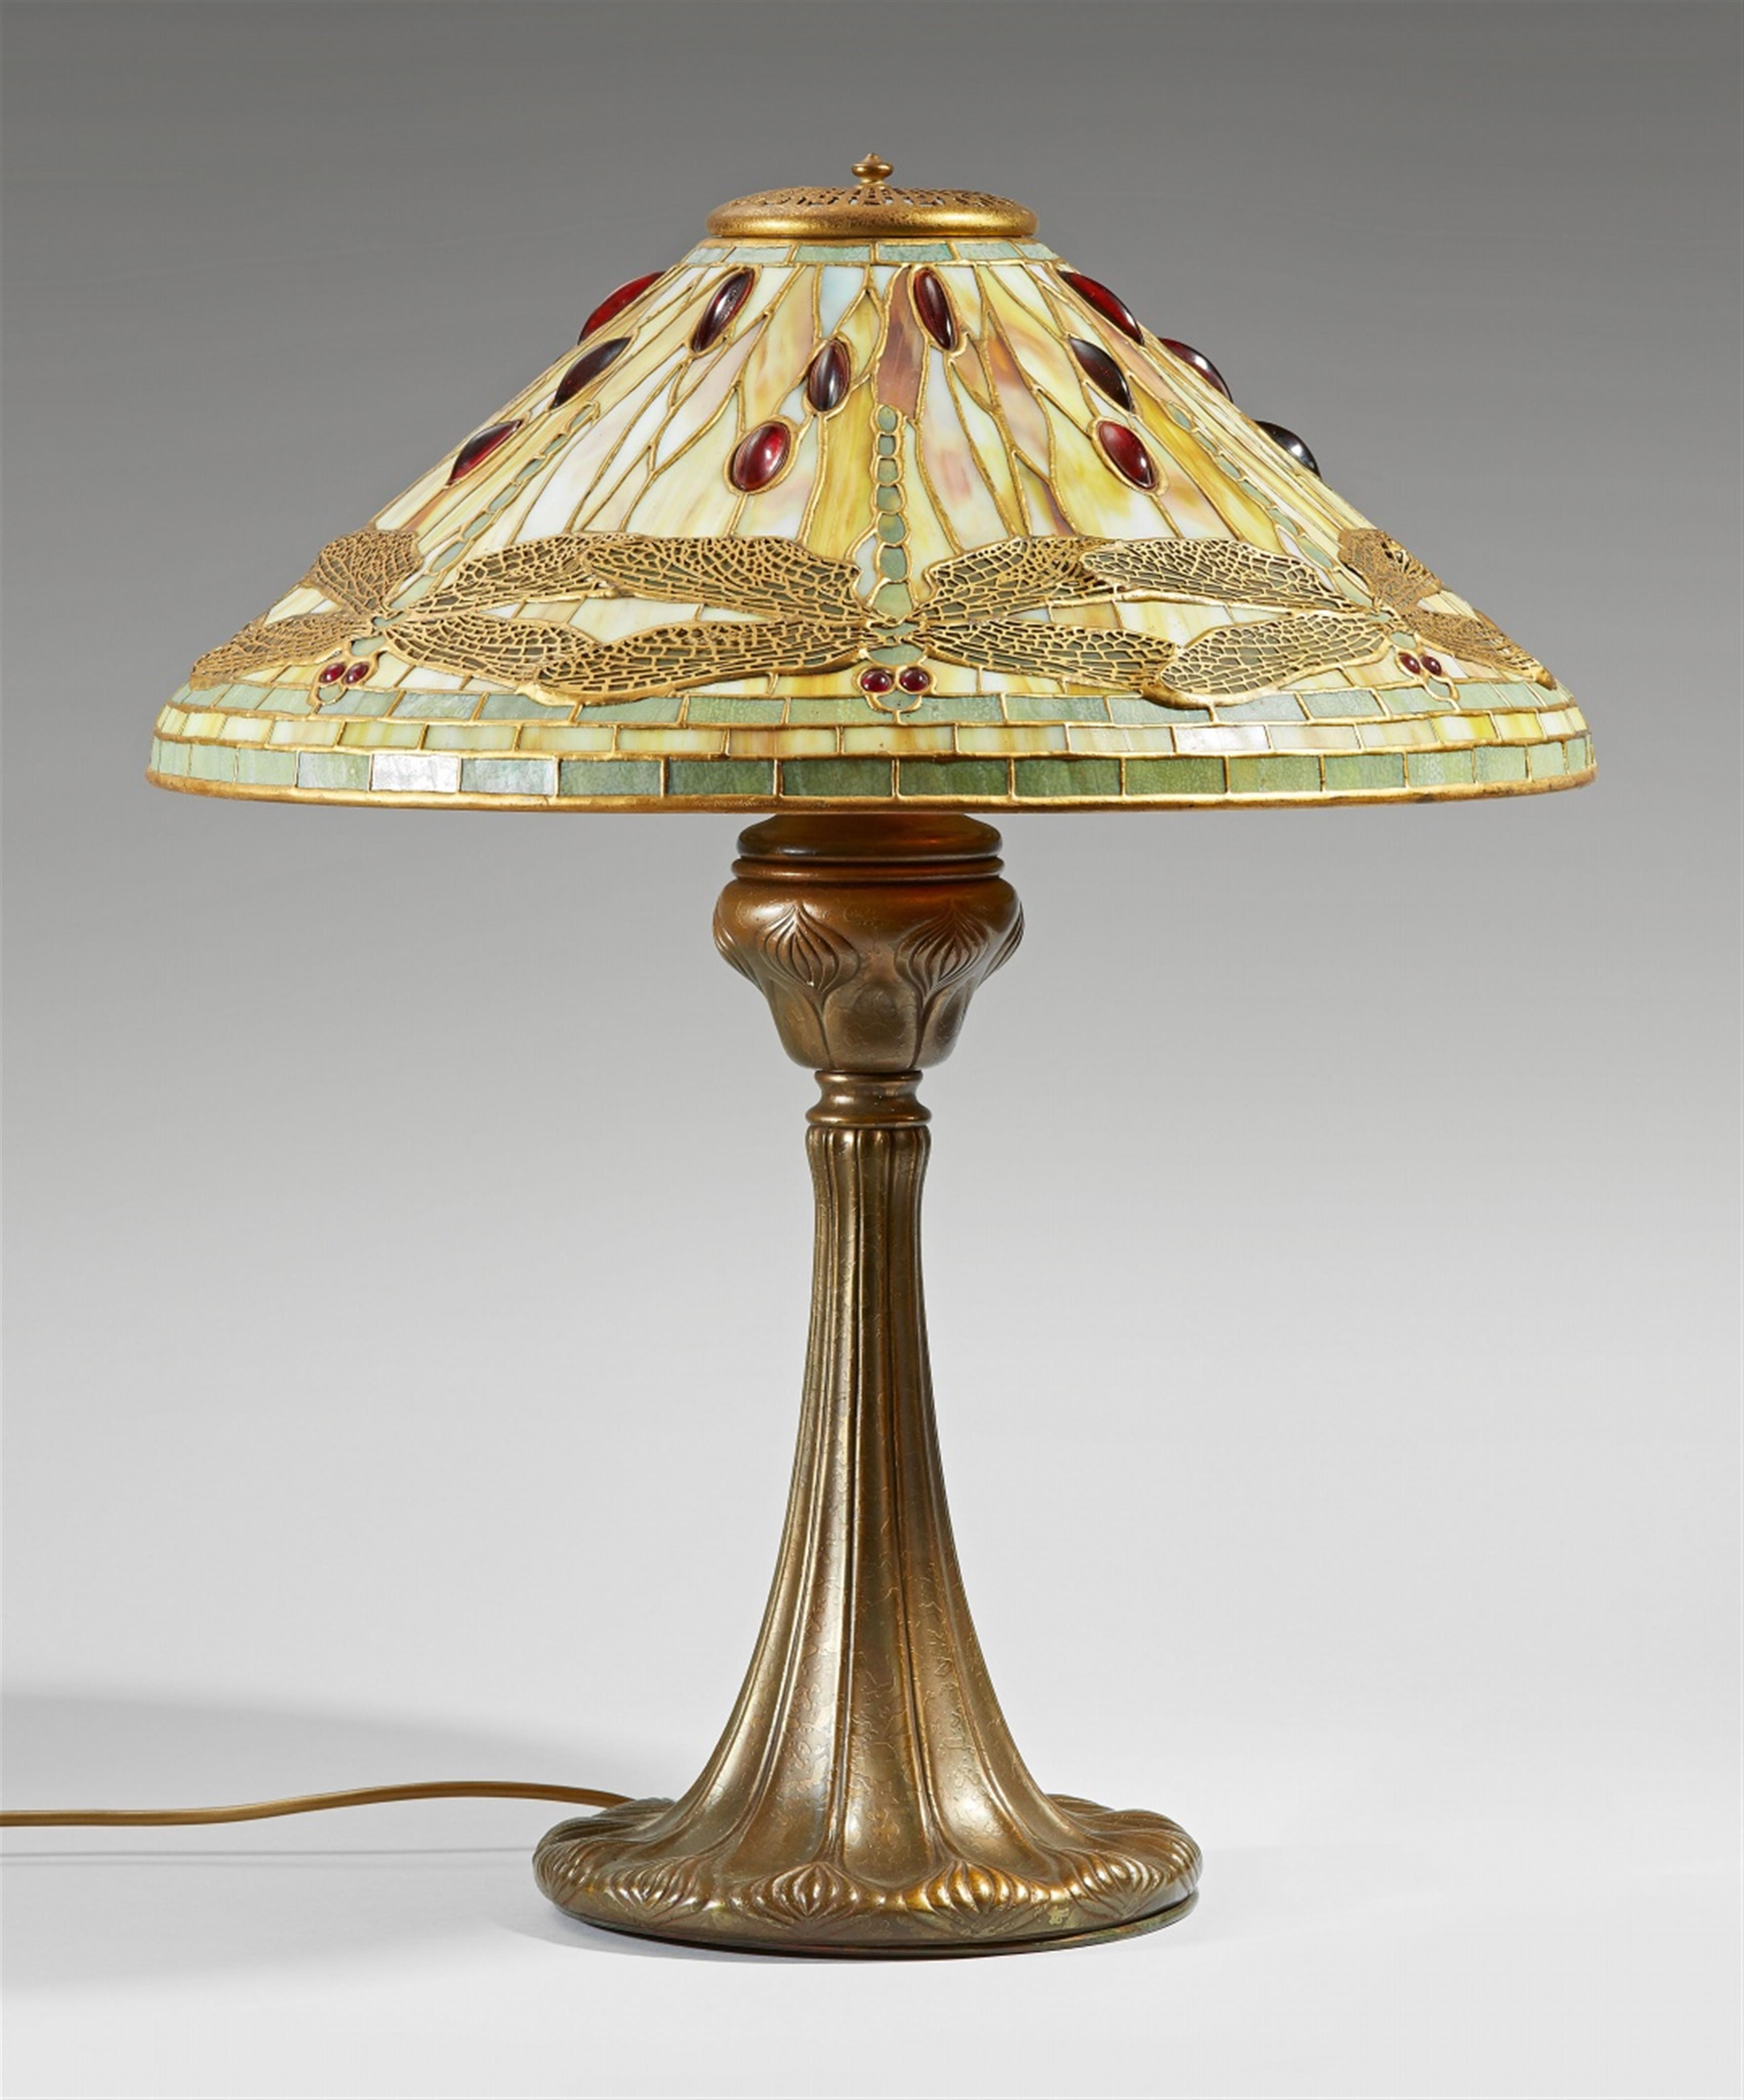 A Tiffany Studios "Dragonfly Cone" table lamp - image-1